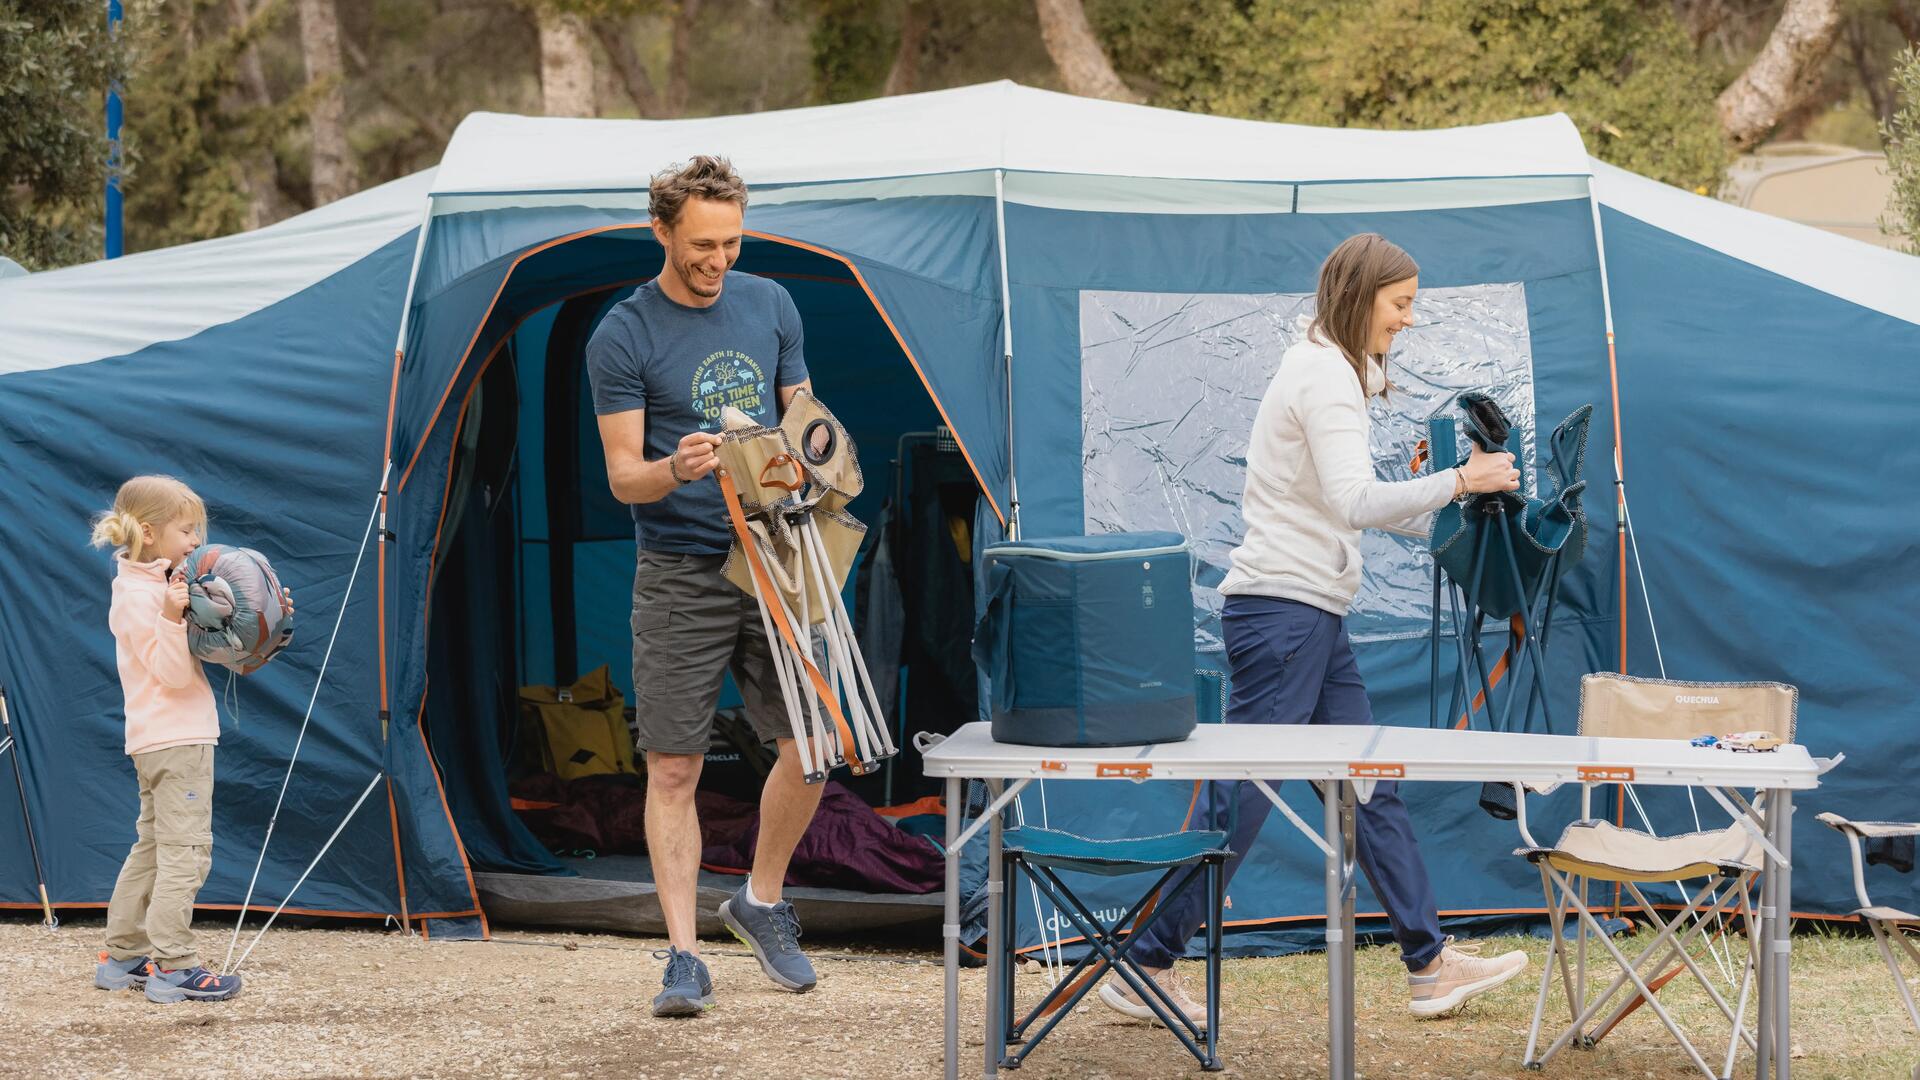 Camping equipment: tips on what to bring